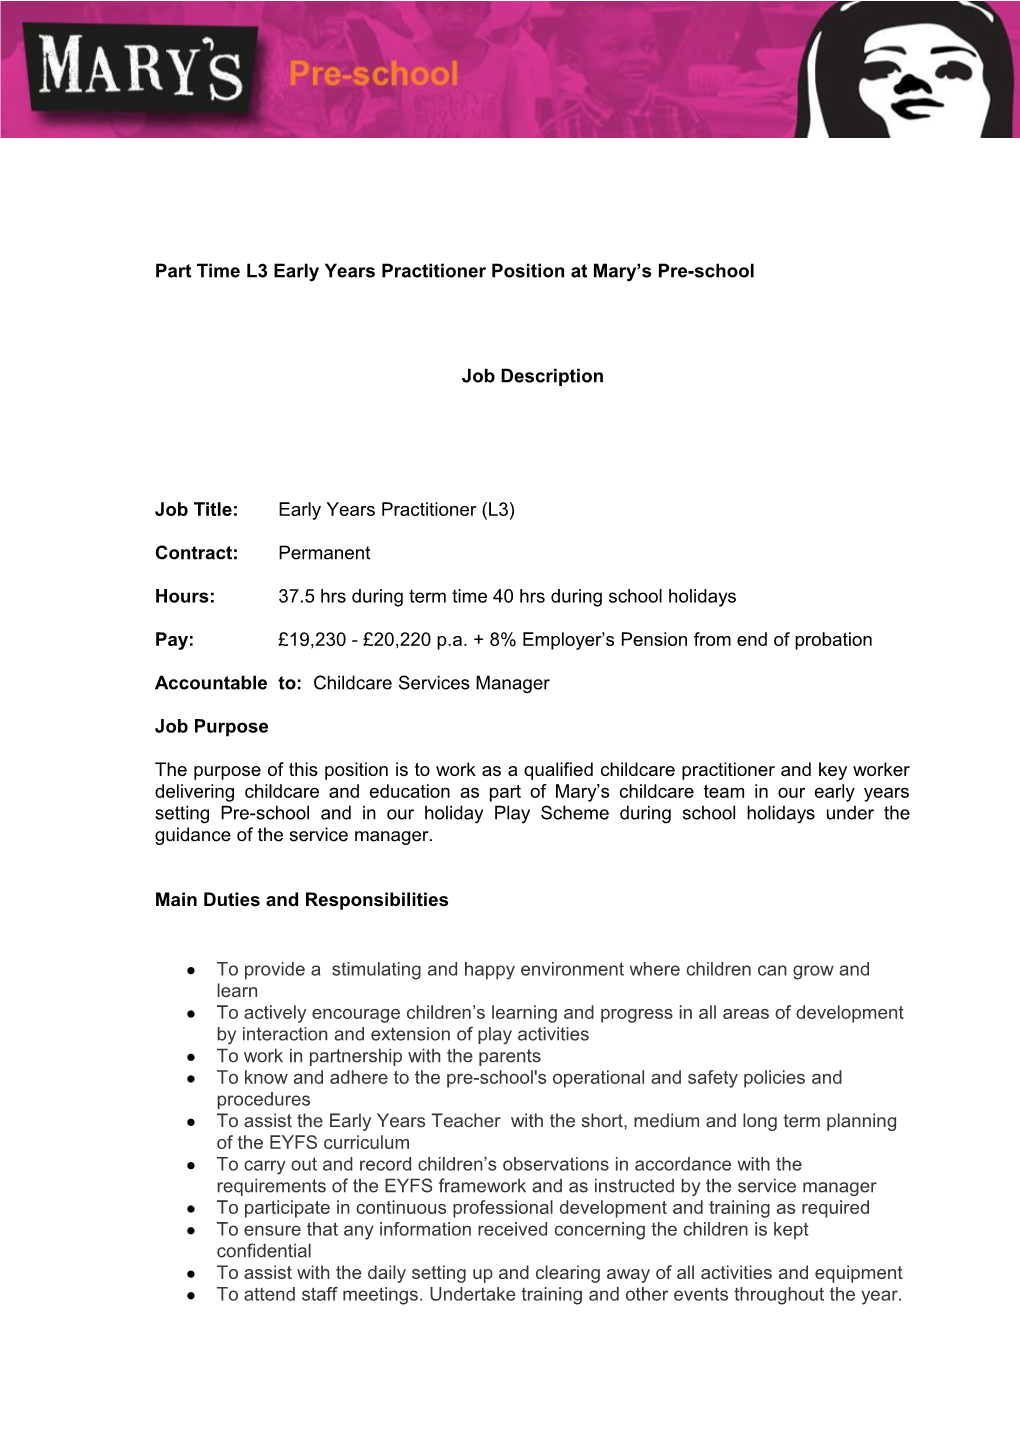 Part Time L3 Early Years Practitioner Position at Mary S Pre-School